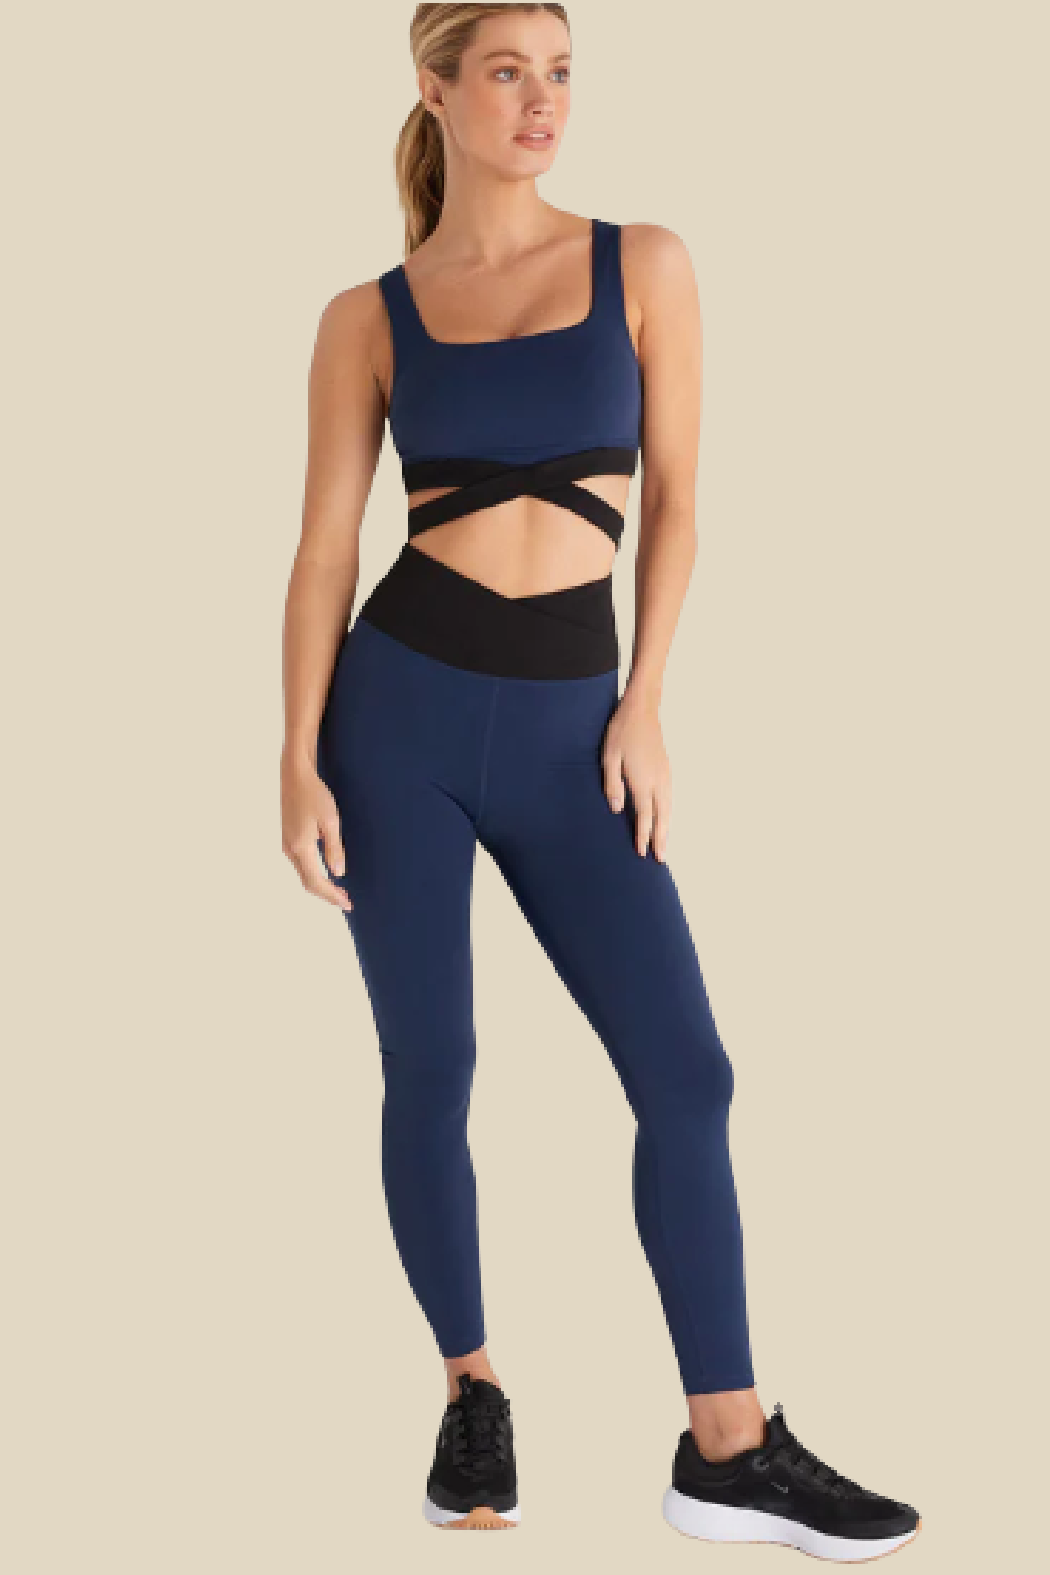 Crossover Legging – The Old Mill